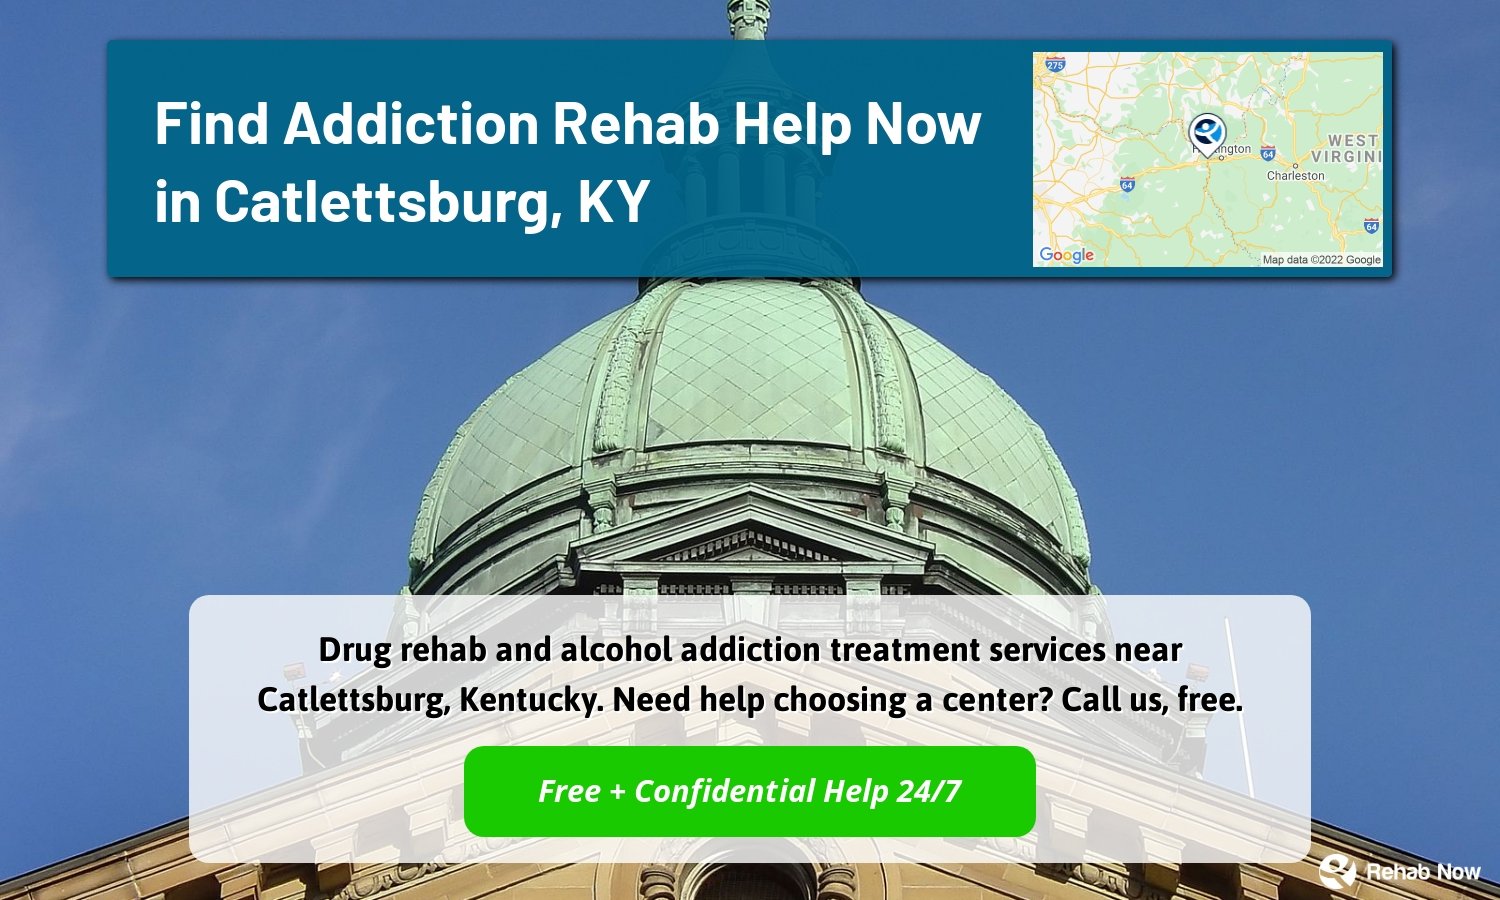 Drug rehab and alcohol addiction treatment services near Catlettsburg, Kentucky. Need help choosing a center? Call us, free.